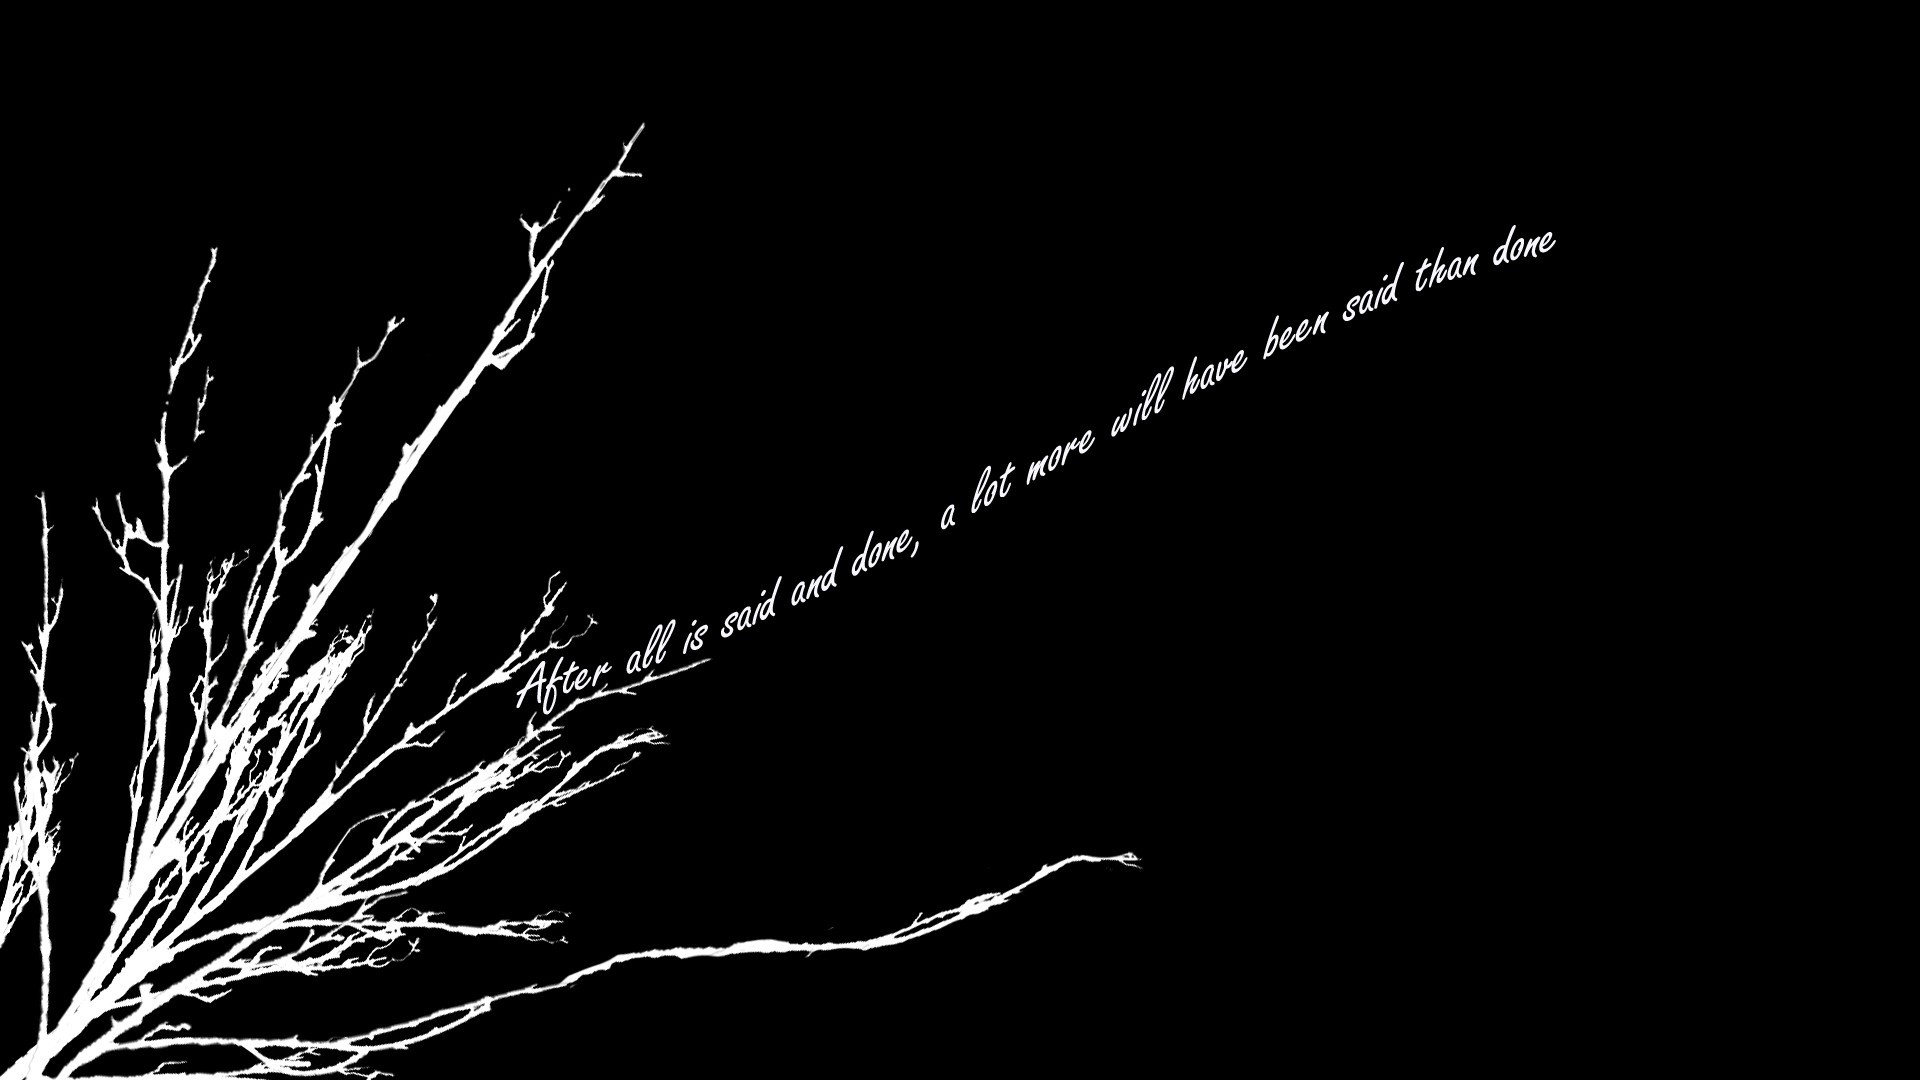 Nice Quote In Black Background Image HD Wallpaper